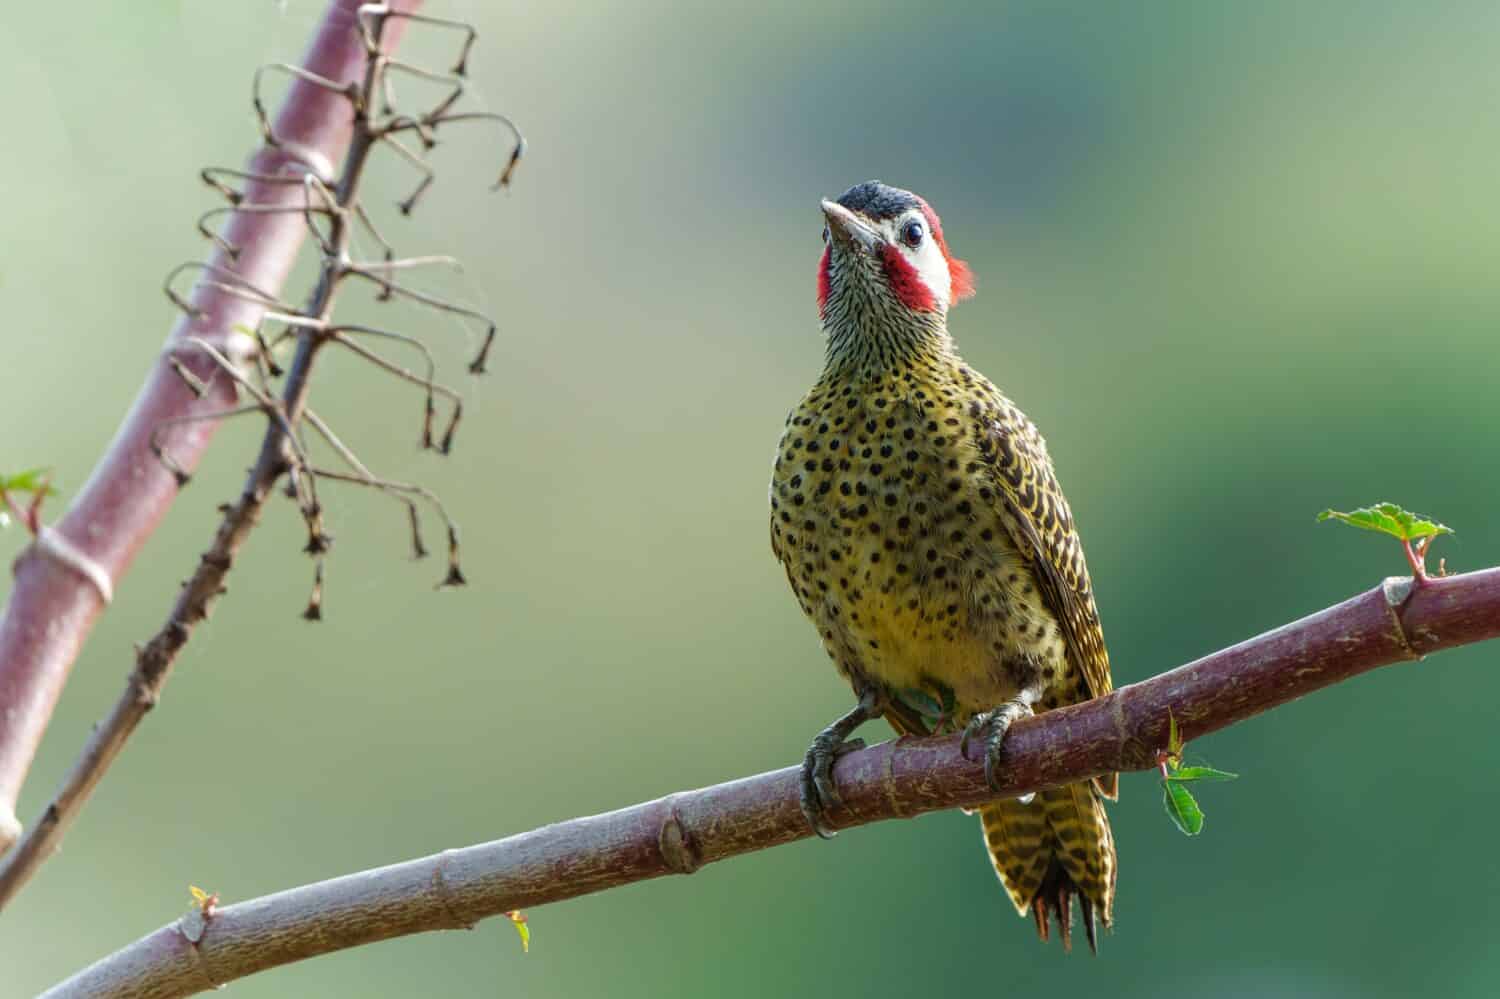 green-barred woodpecker or green-barred flicker (Colaptes melanochloros) sitting on a branch in the Northern Pantanal, Mato Grosso, Brazil